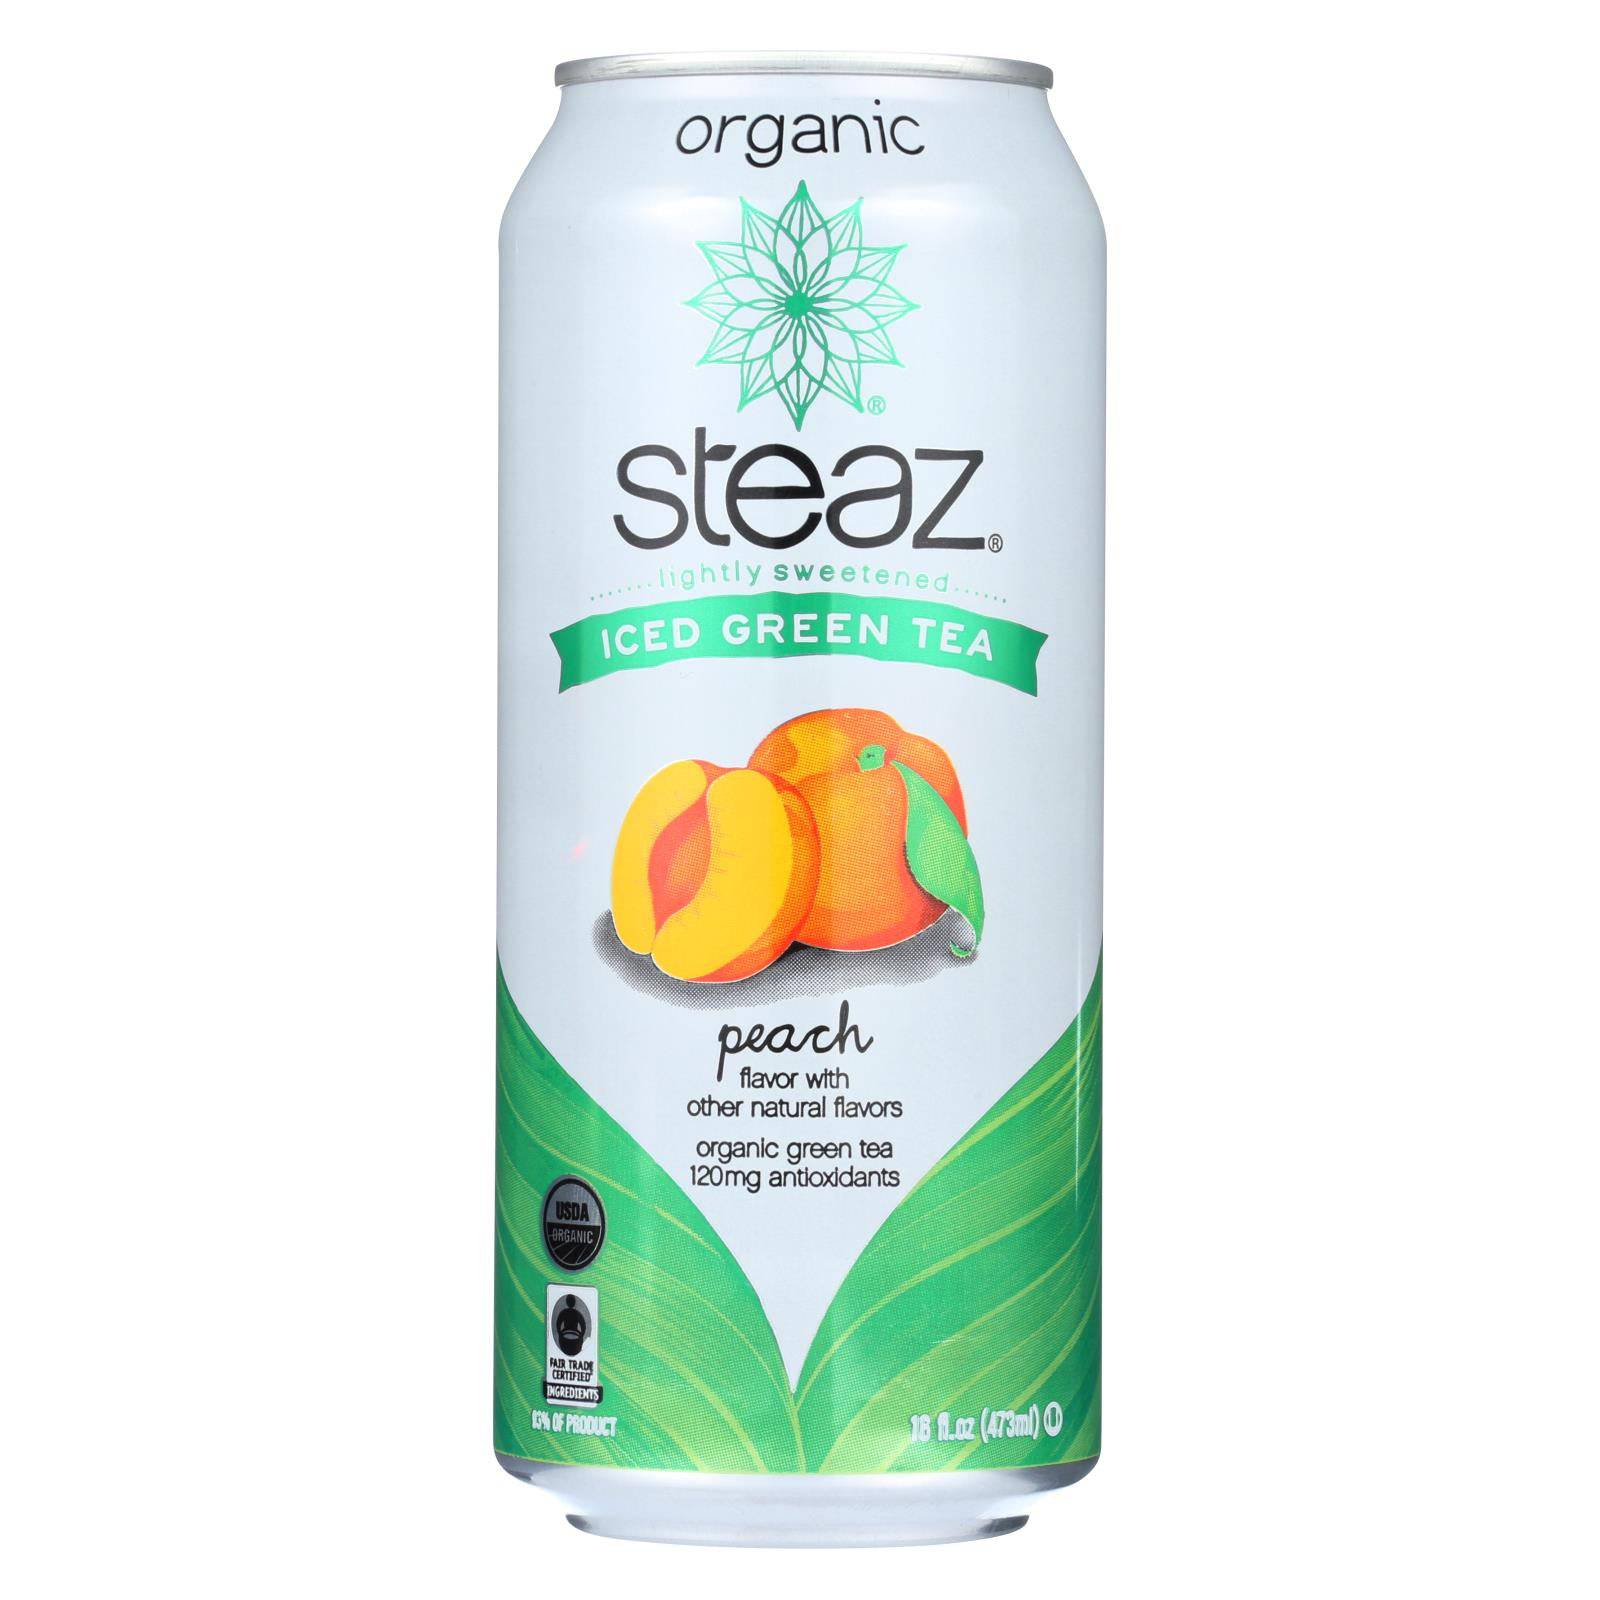 Buy Steaz Lightly Sweetened Green Tea - Peach - Case Of 12 - 16 Fl Oz.  at OnlyNaturals.us